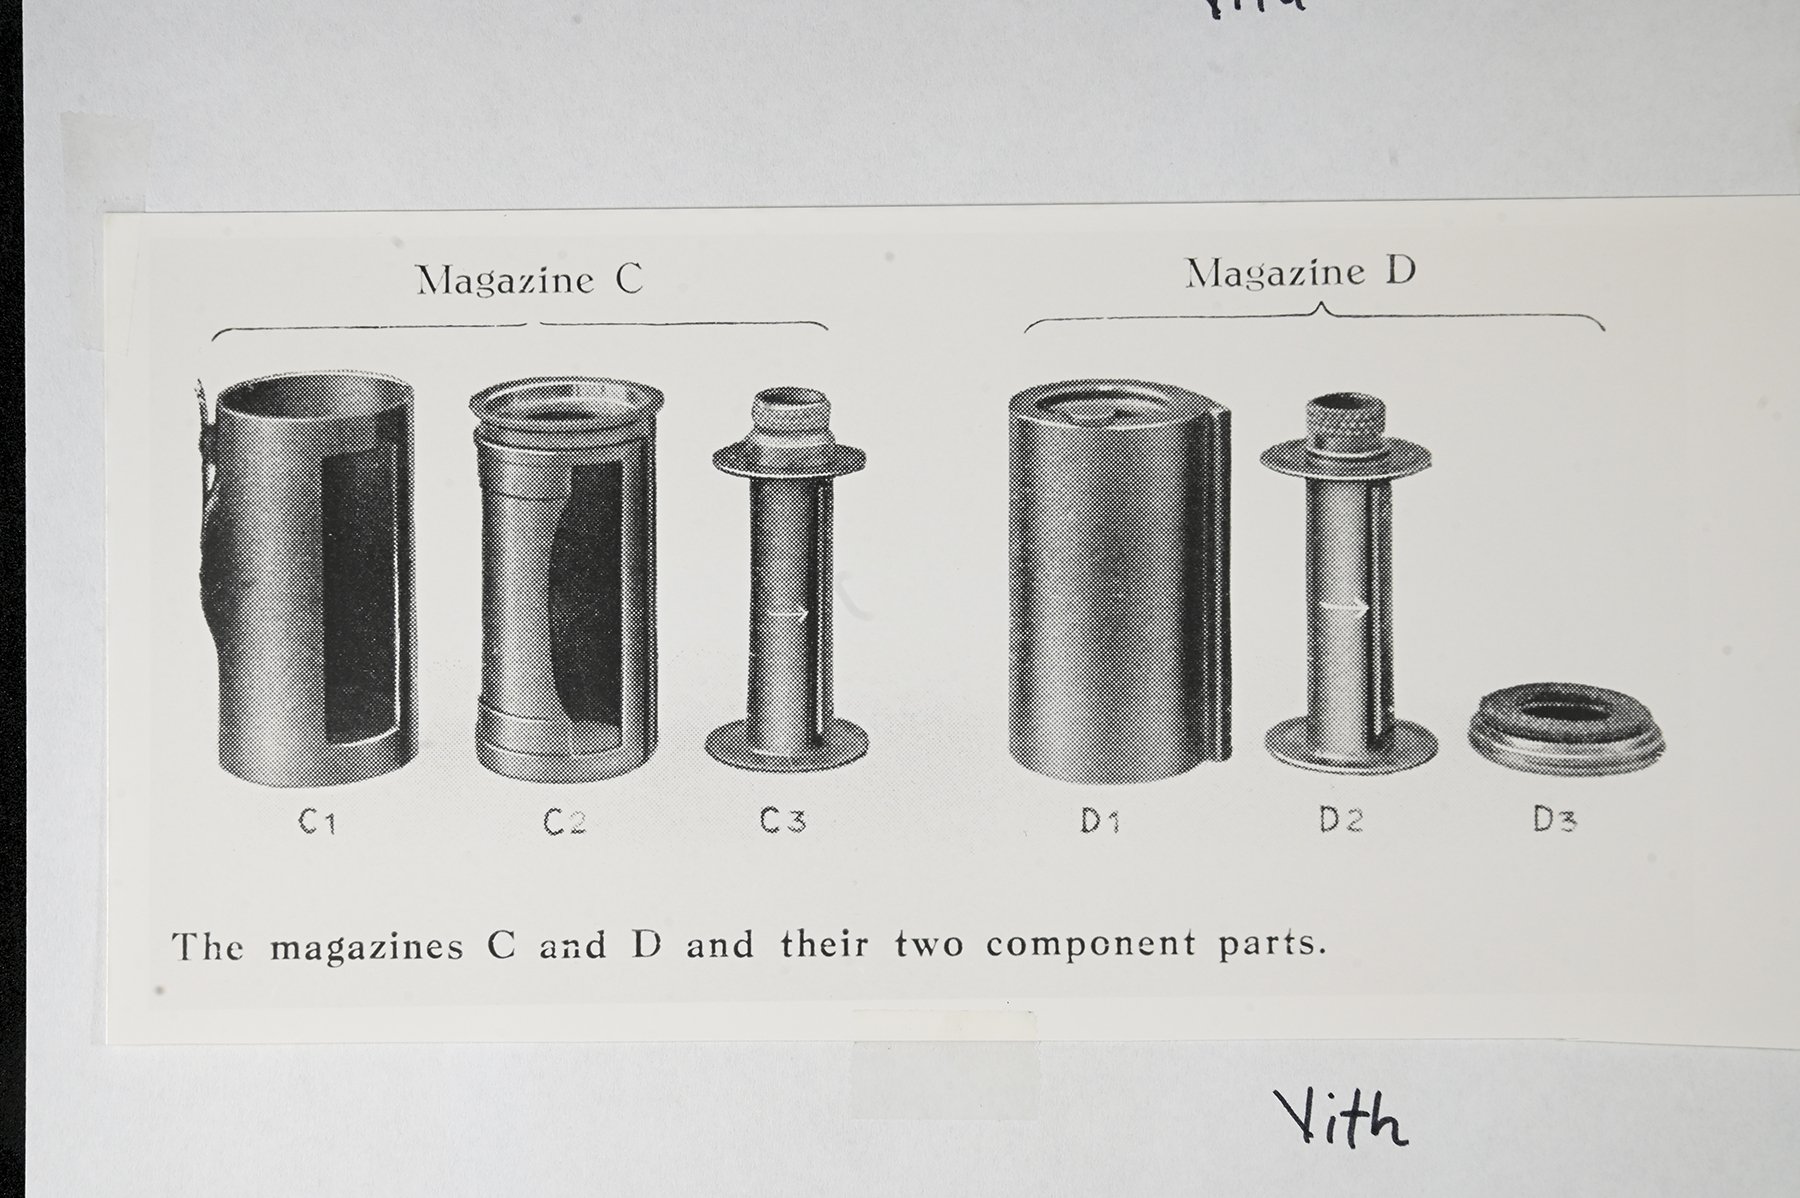 Components of type C (left) and type D cassettes